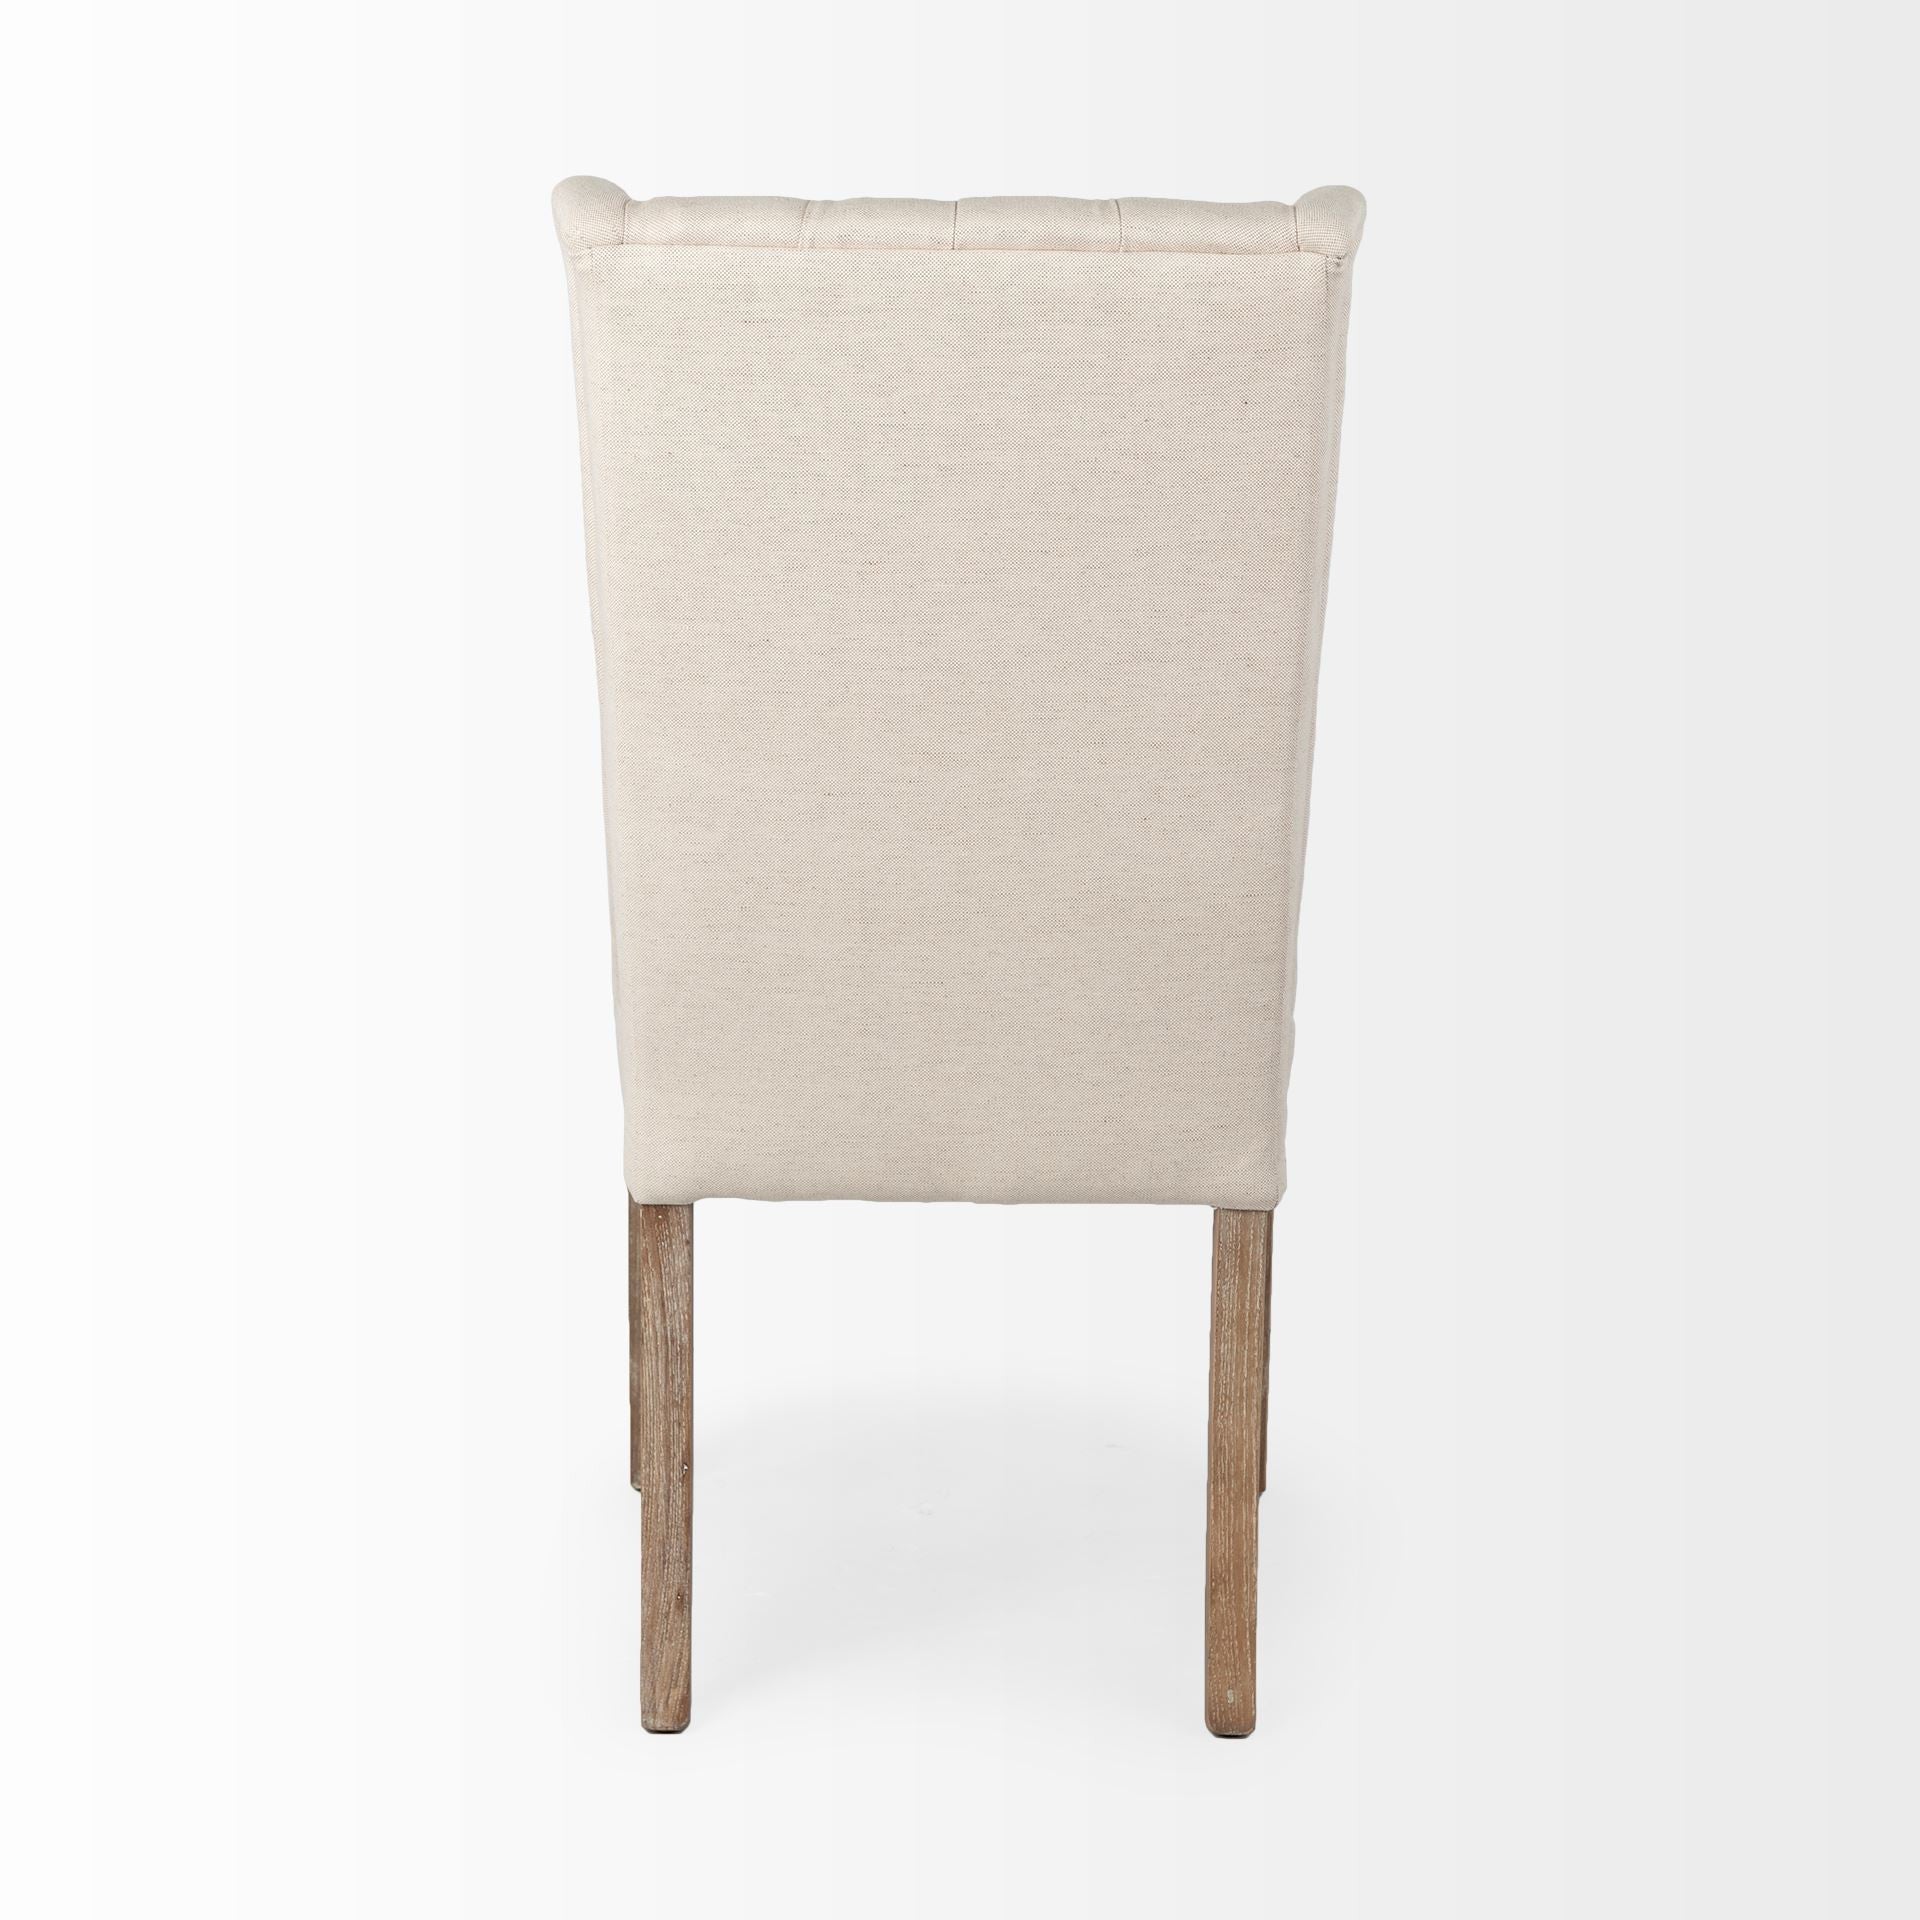 Tufted Cream And Brown Upholstered Linen Wing Back Dining Side Chair